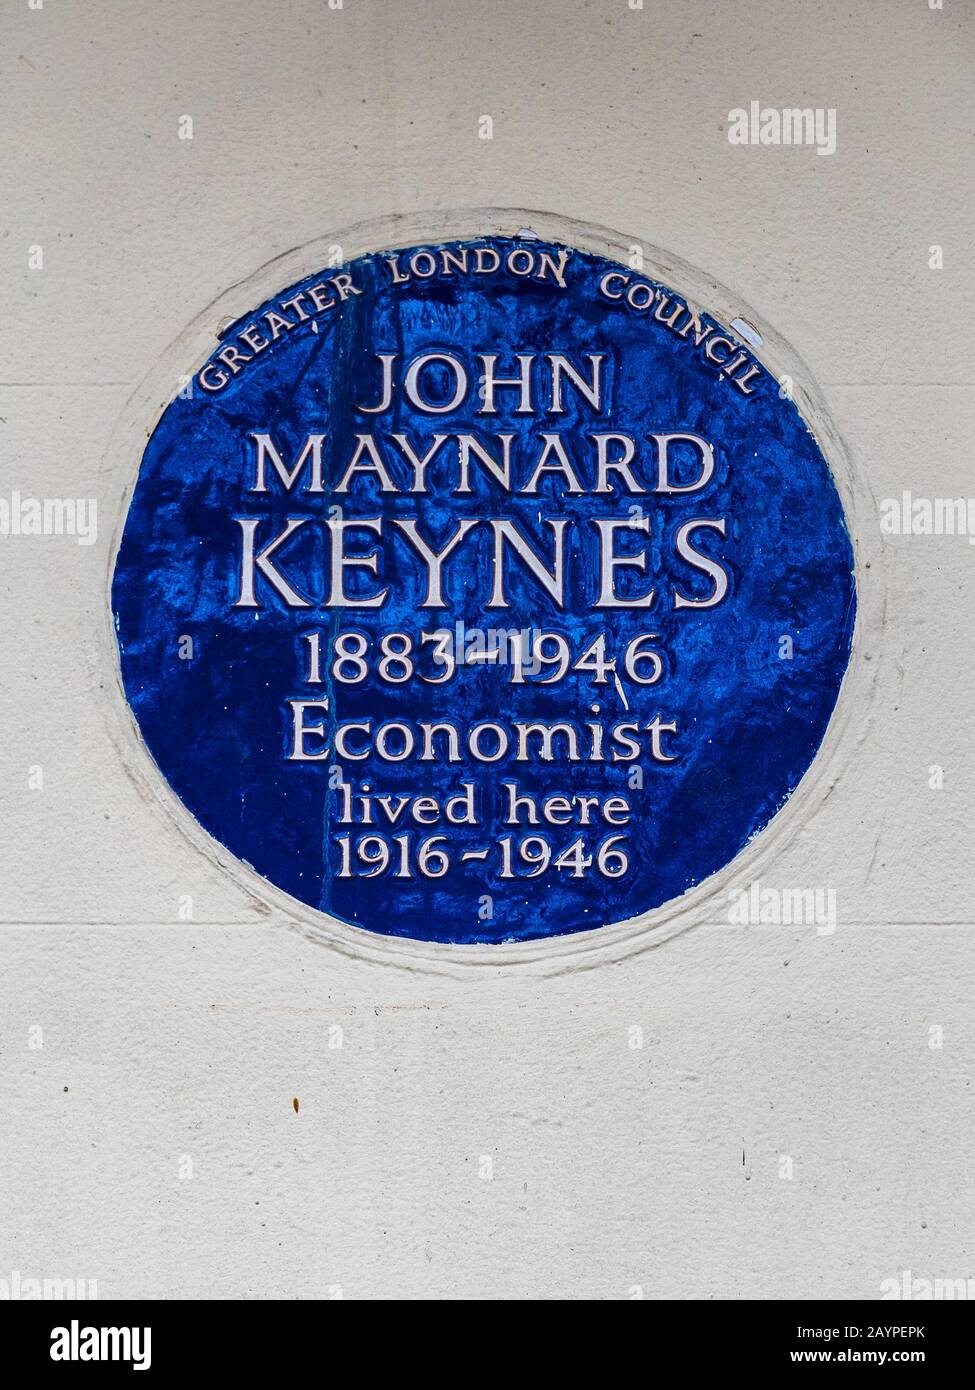 John Maynard Keynes Blue Plaque on his house at 46 Gordon Square, Bloomsbury, London. The noted economist lived here 1916-1946. Stock Photo